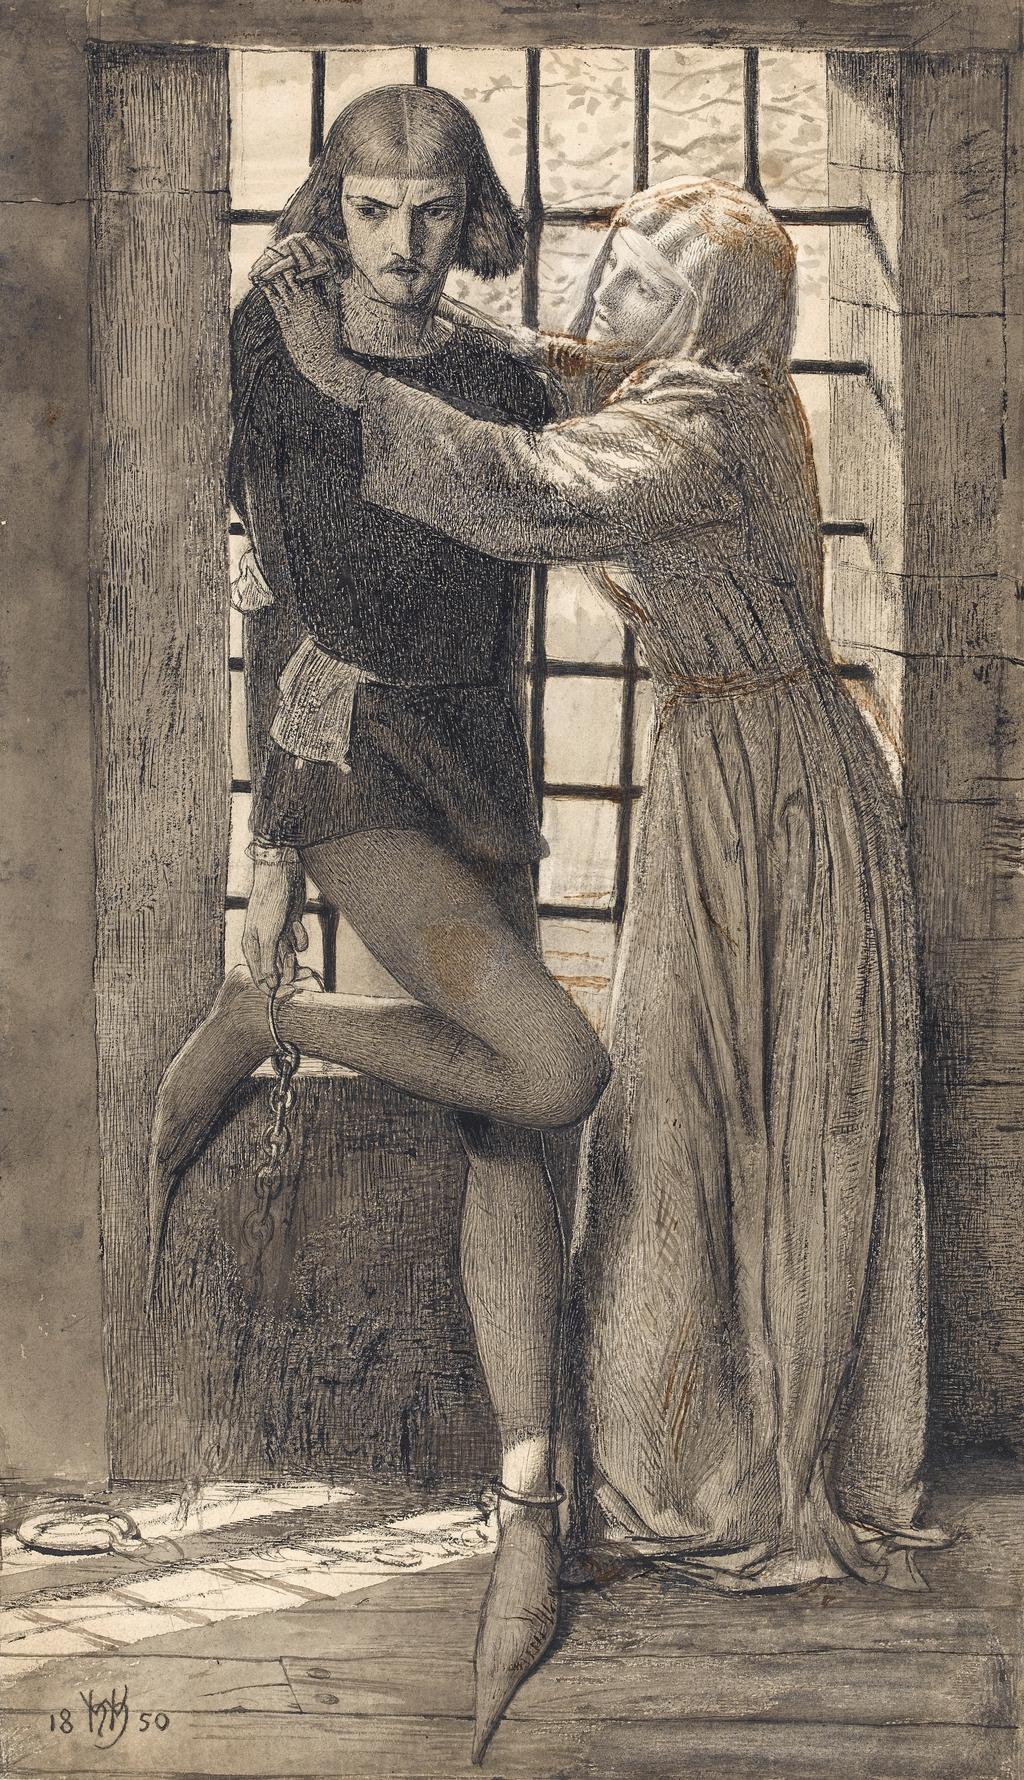 An image of Claudio and Isabella. Hunt, William Holman (British, 1827-1910). Graphite, pen, Indian ink and wash on paper, height 317 mm, width 184 mm, 1850.